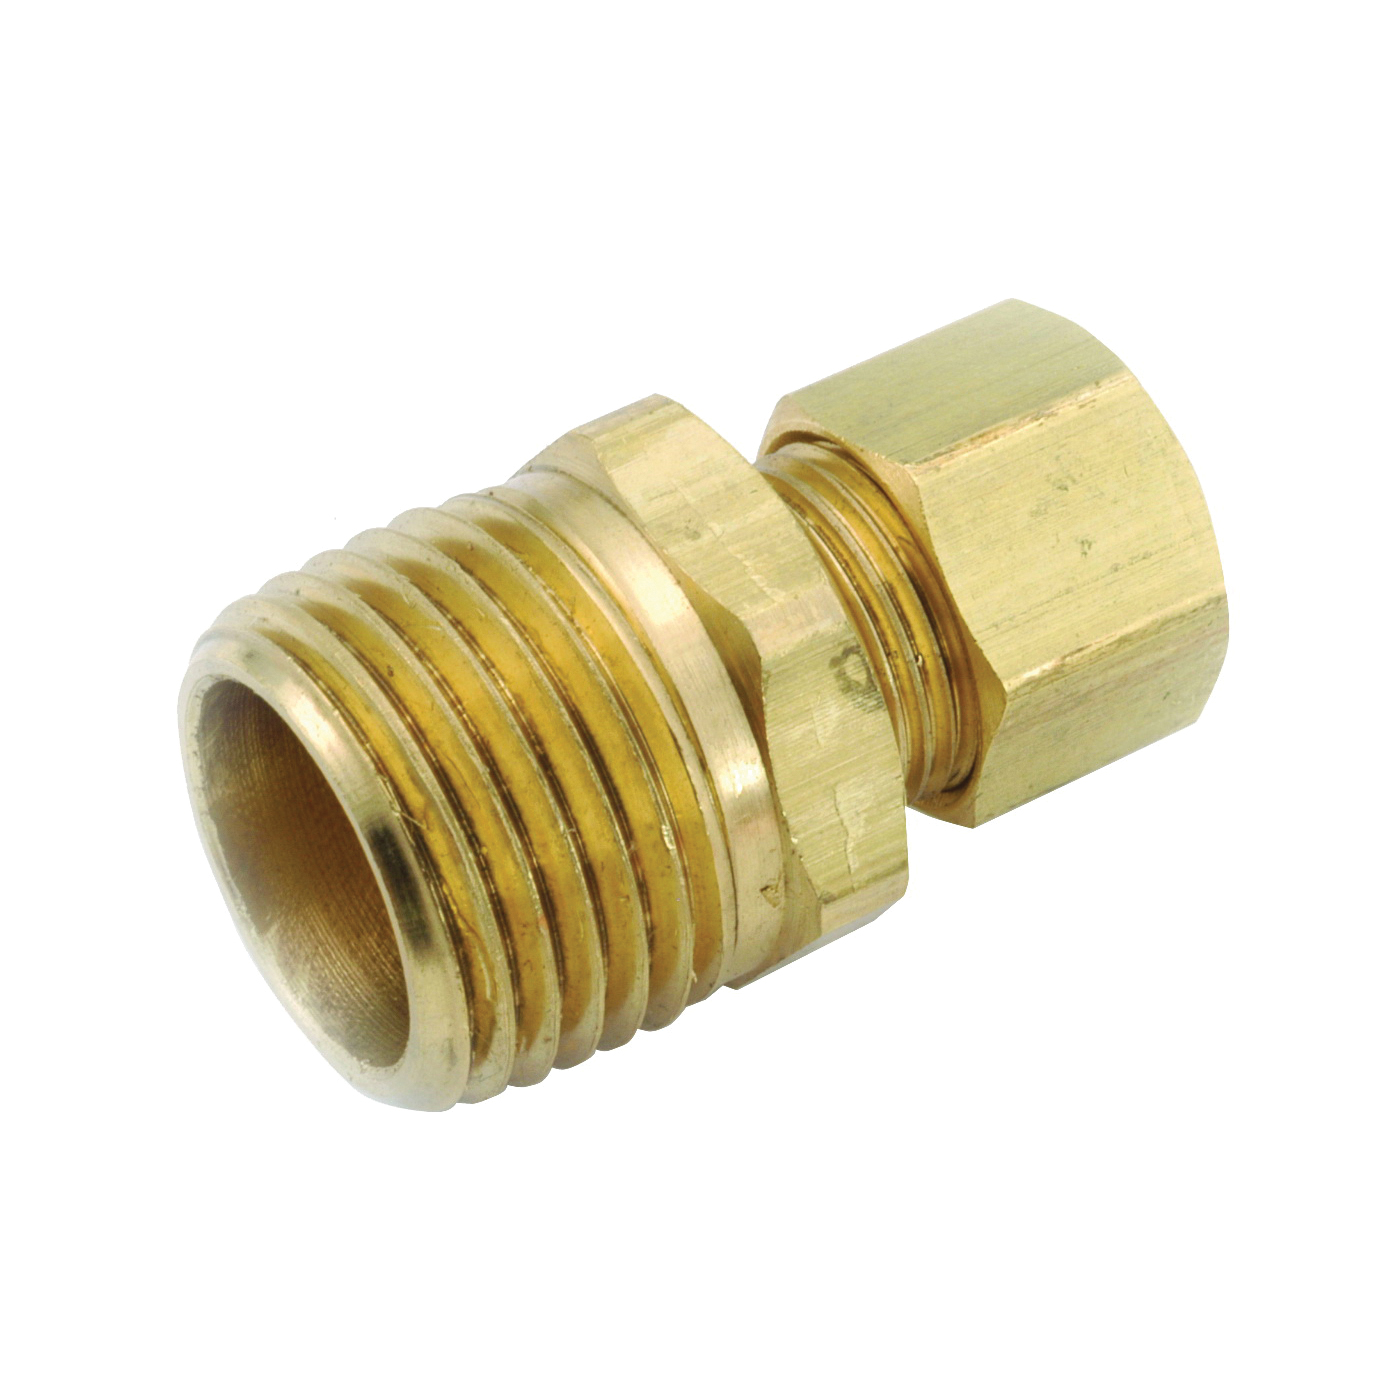 Shop Brass Pipe Compression Fittings at McCoy's